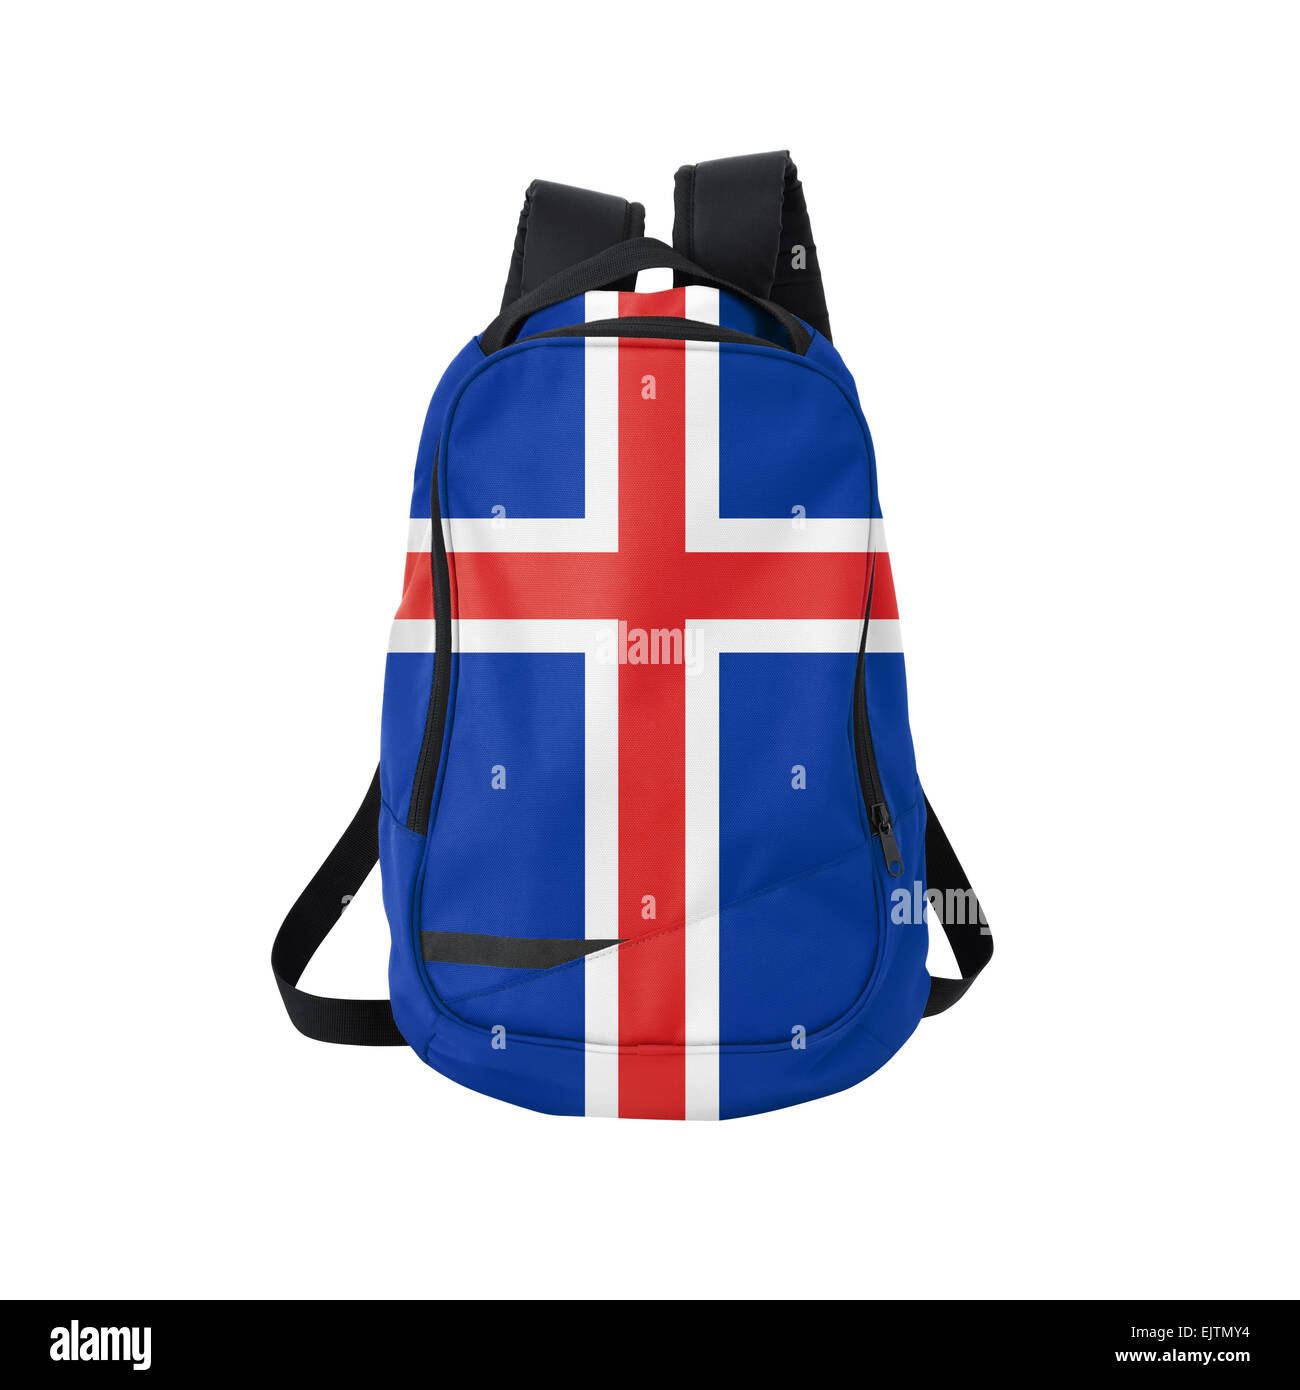 Icelandic flag backpack isolated on white background. Back to school concept. Education and study abroad. Travel and tourism Stock Photo